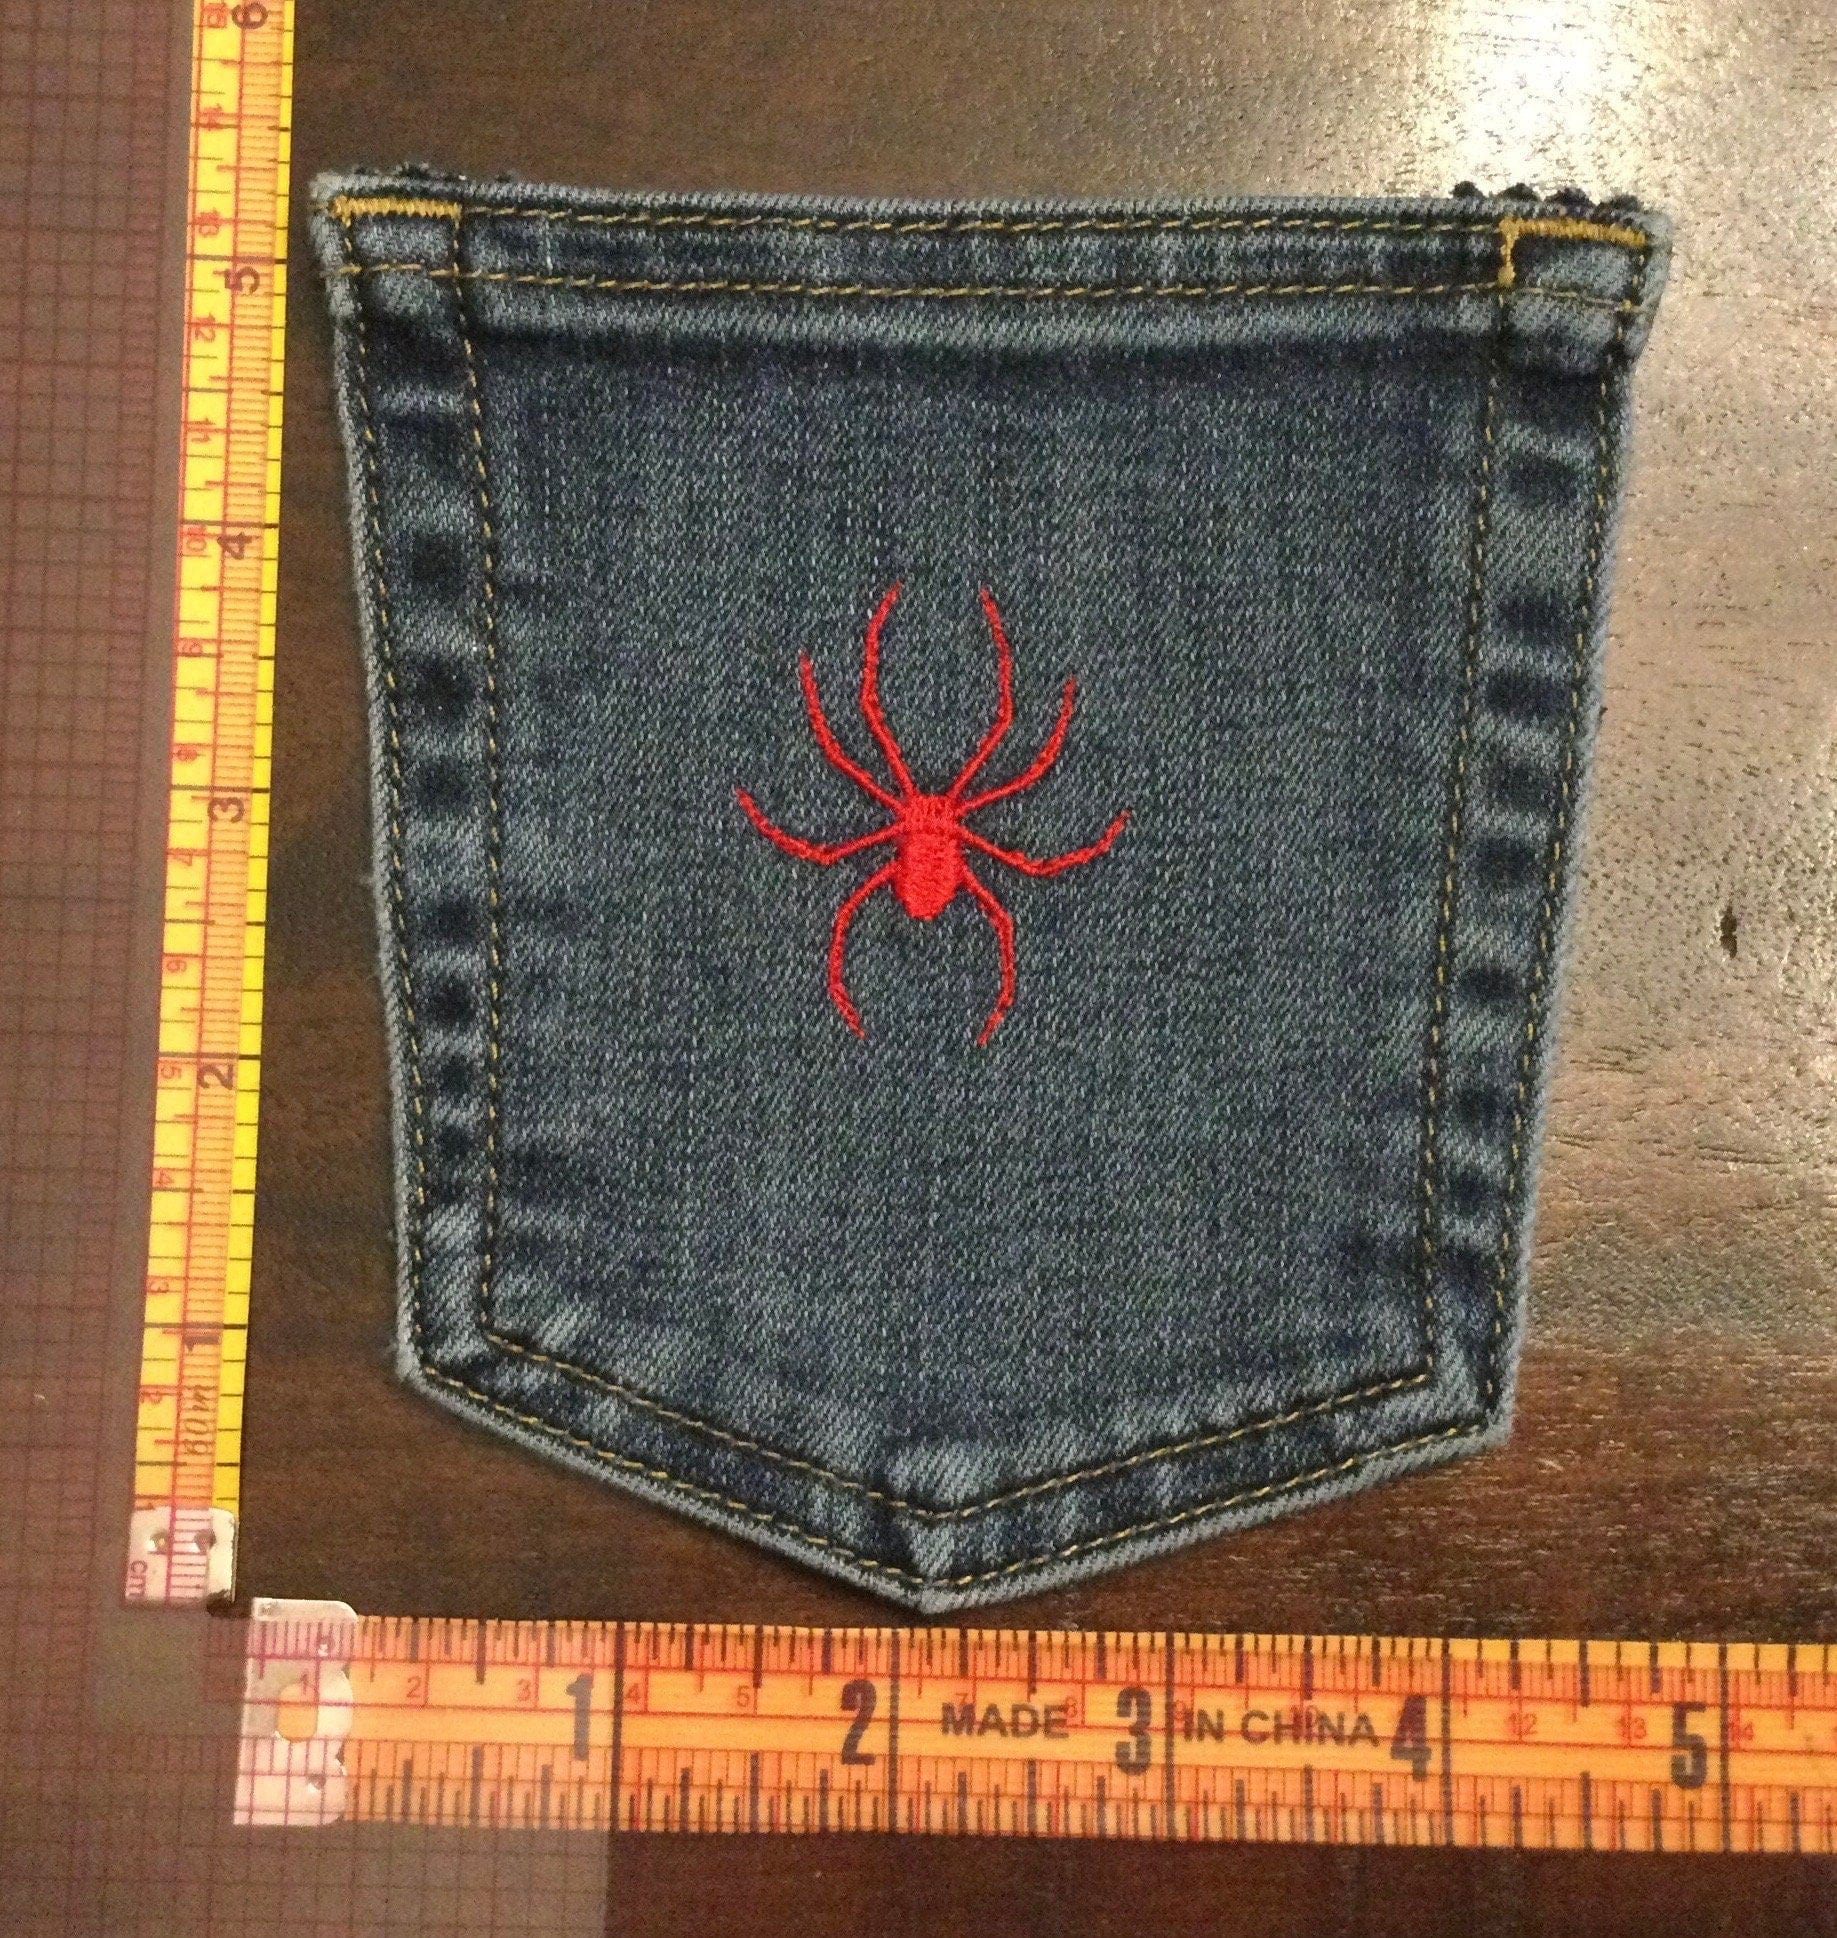 Red Spider HOT POCKET - OOAK embroidered denim pocket patch 5X4 Iron On embroidery patches Appliques & Patches